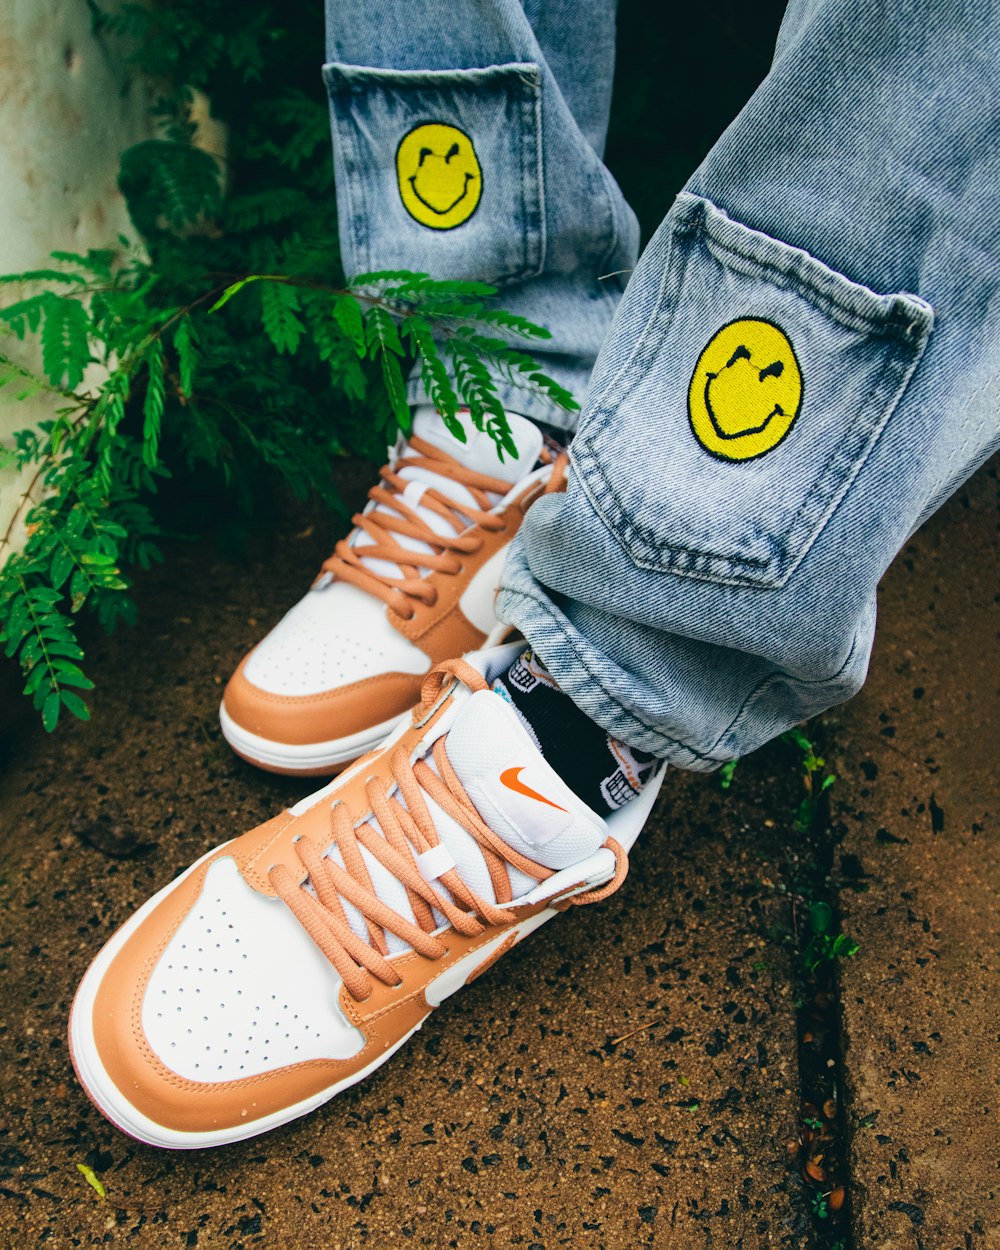 a pair of sneakers with smiley faces painted on them